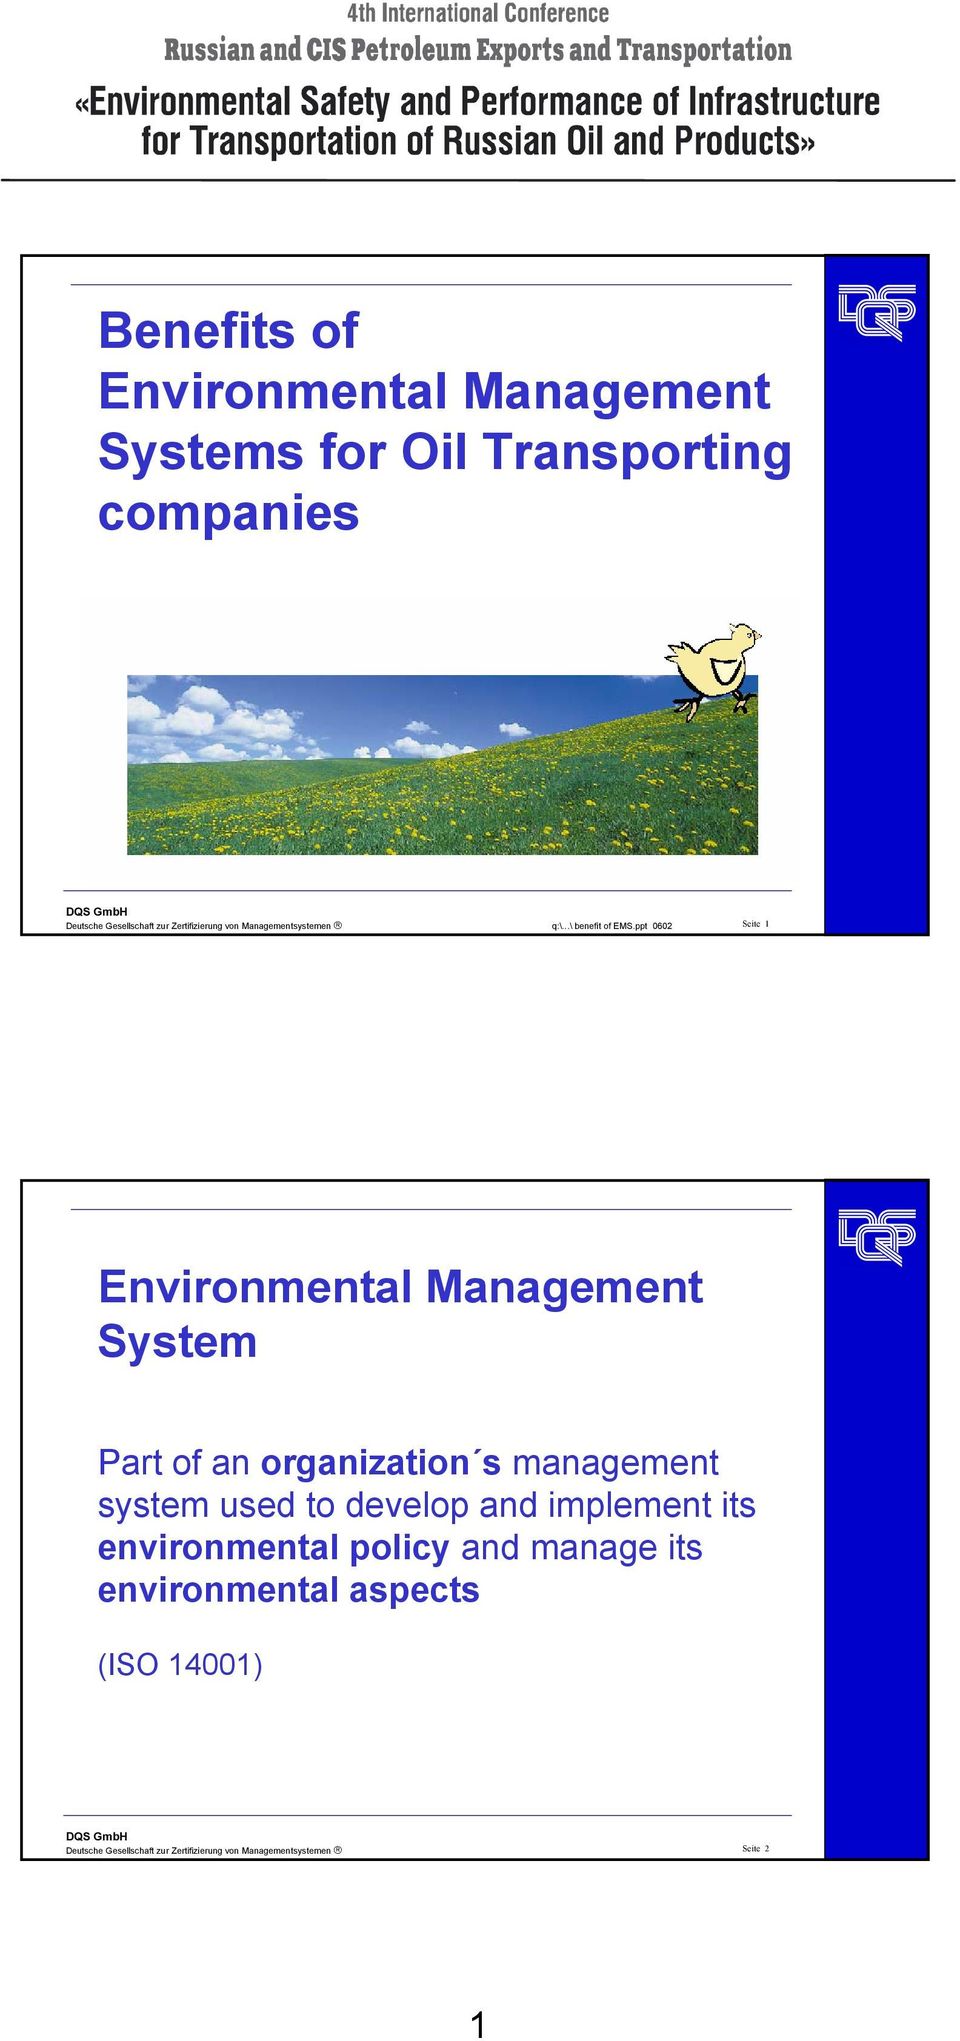 ppt 0602 Seite 1 Environmental Management System Part of an organization s management system used to develop